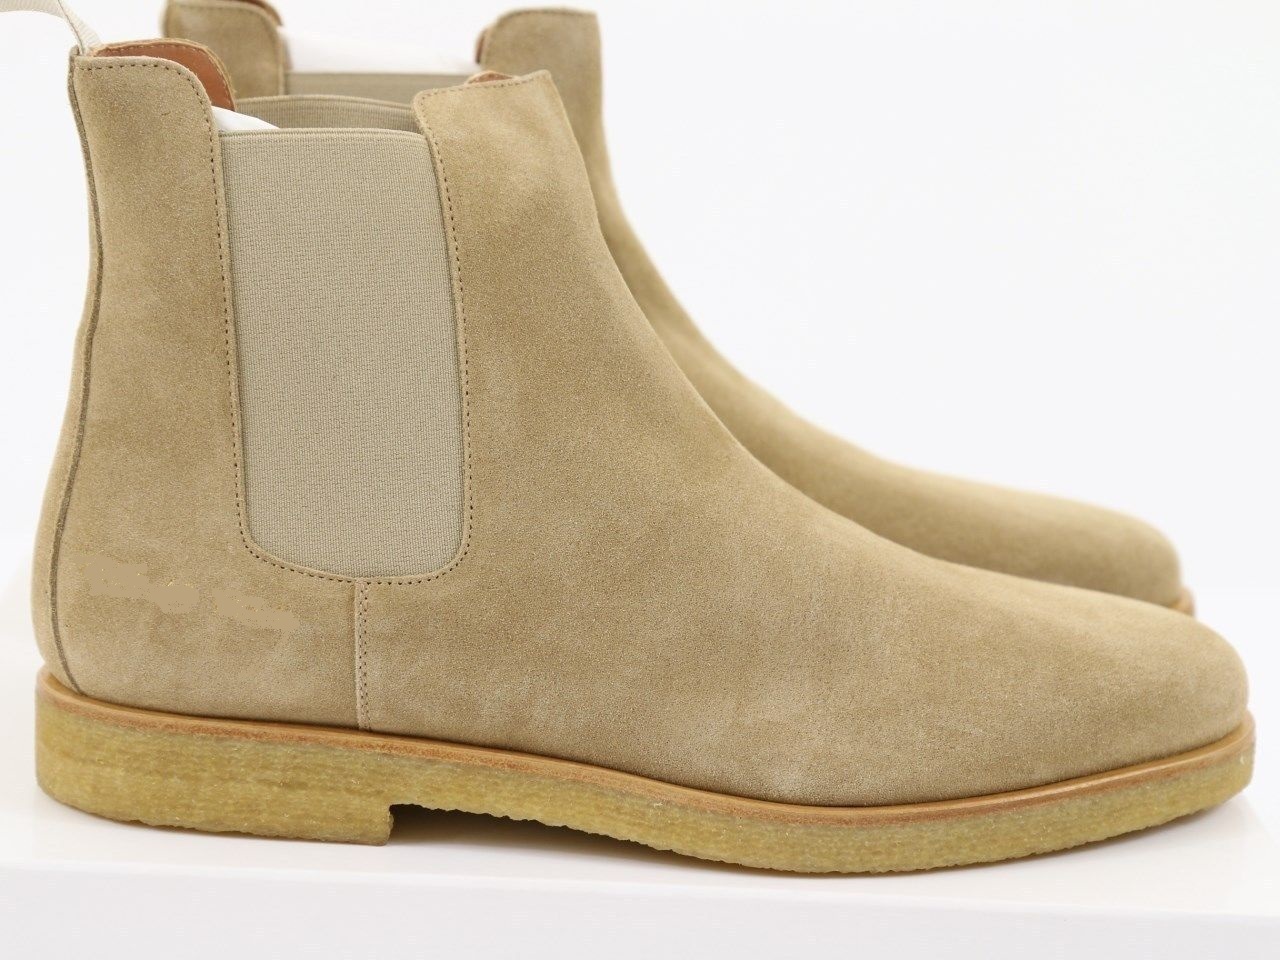 Handmade beige leather boots, crepe sole chelsea boot